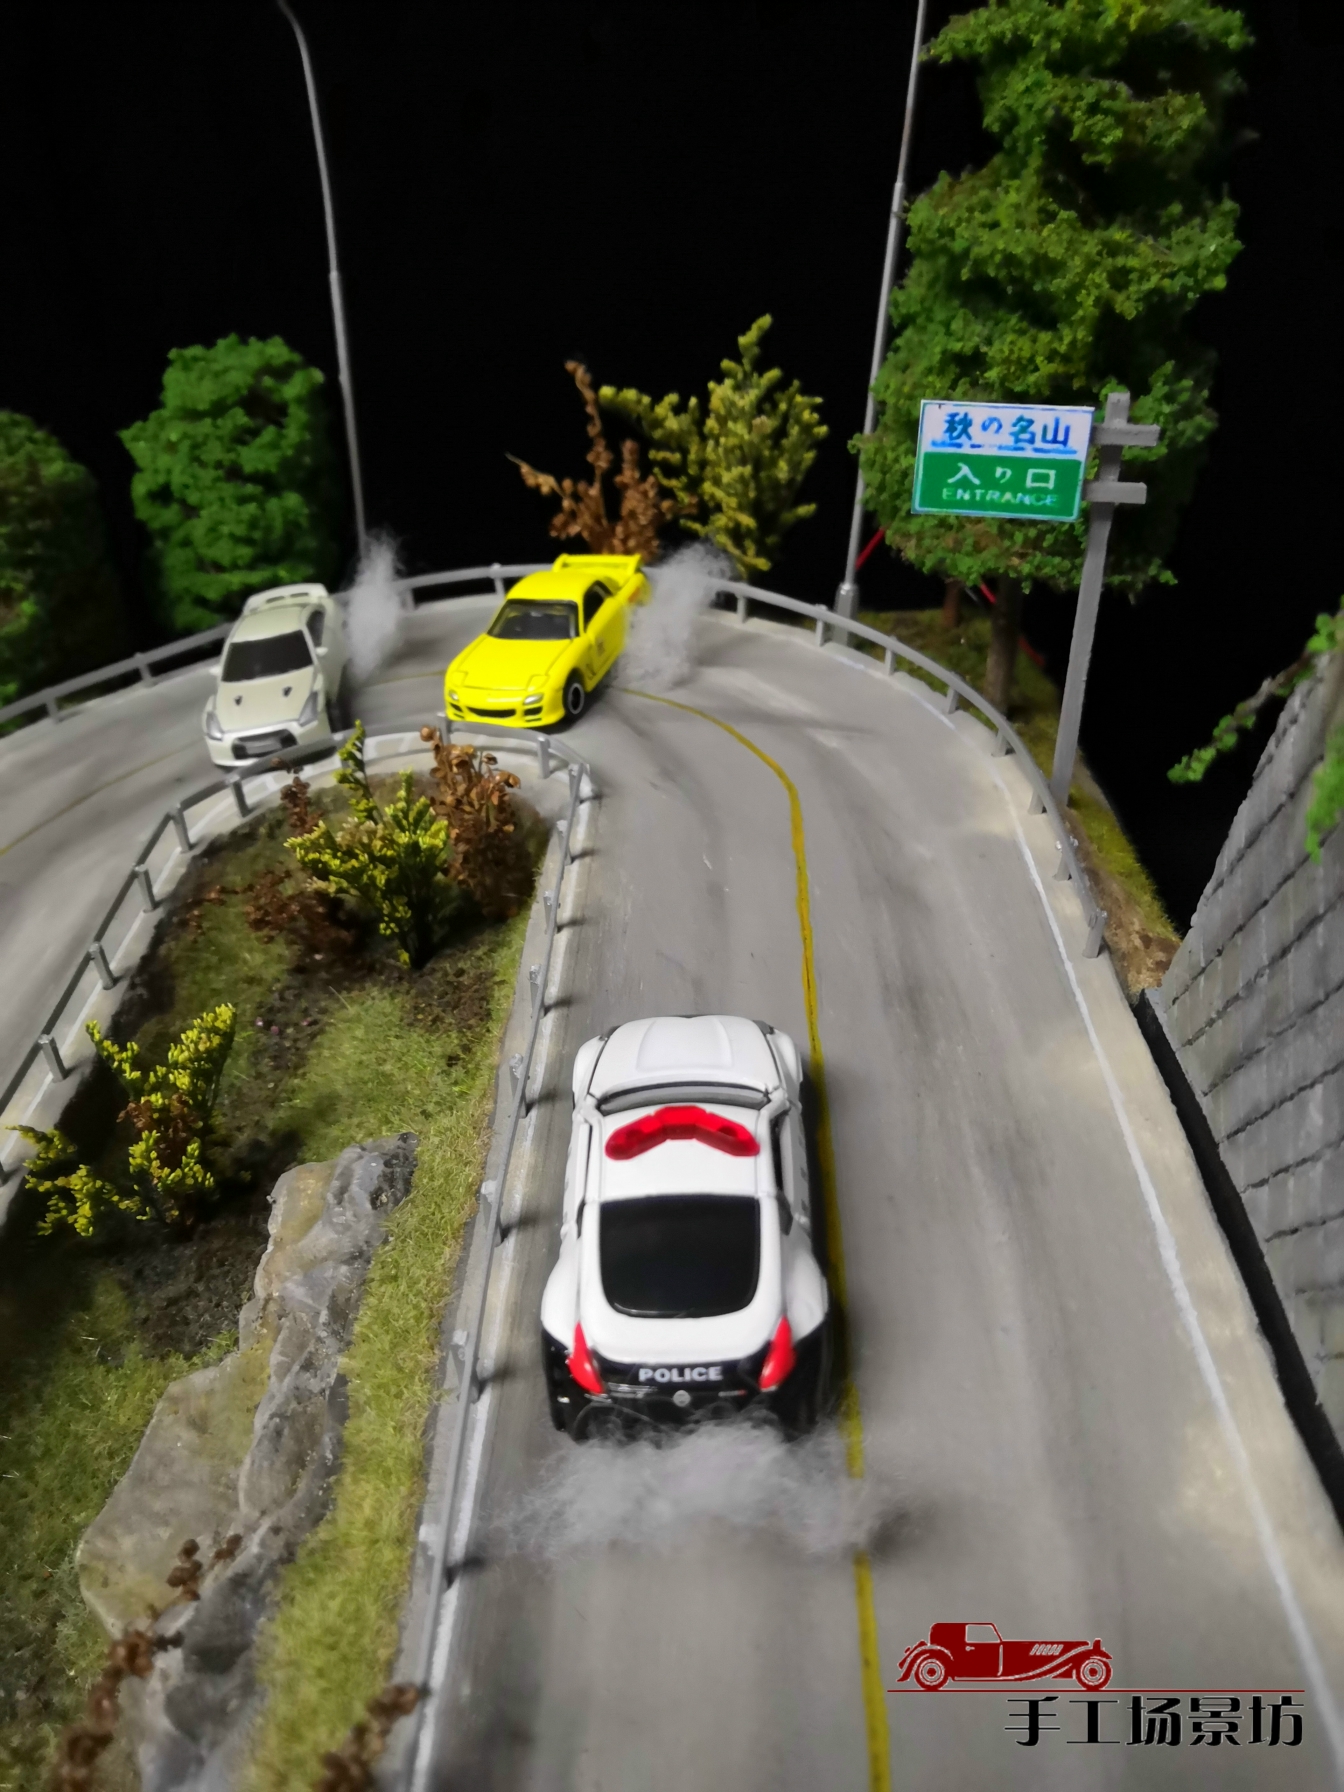 1:64 scale Diorama, Initial D Akina Mountain Racing scene. suitable for 1/64 scale Die-cast model car 1/64 matchbox cars, Hot Wheels, TOMICA cars, takumi cars.